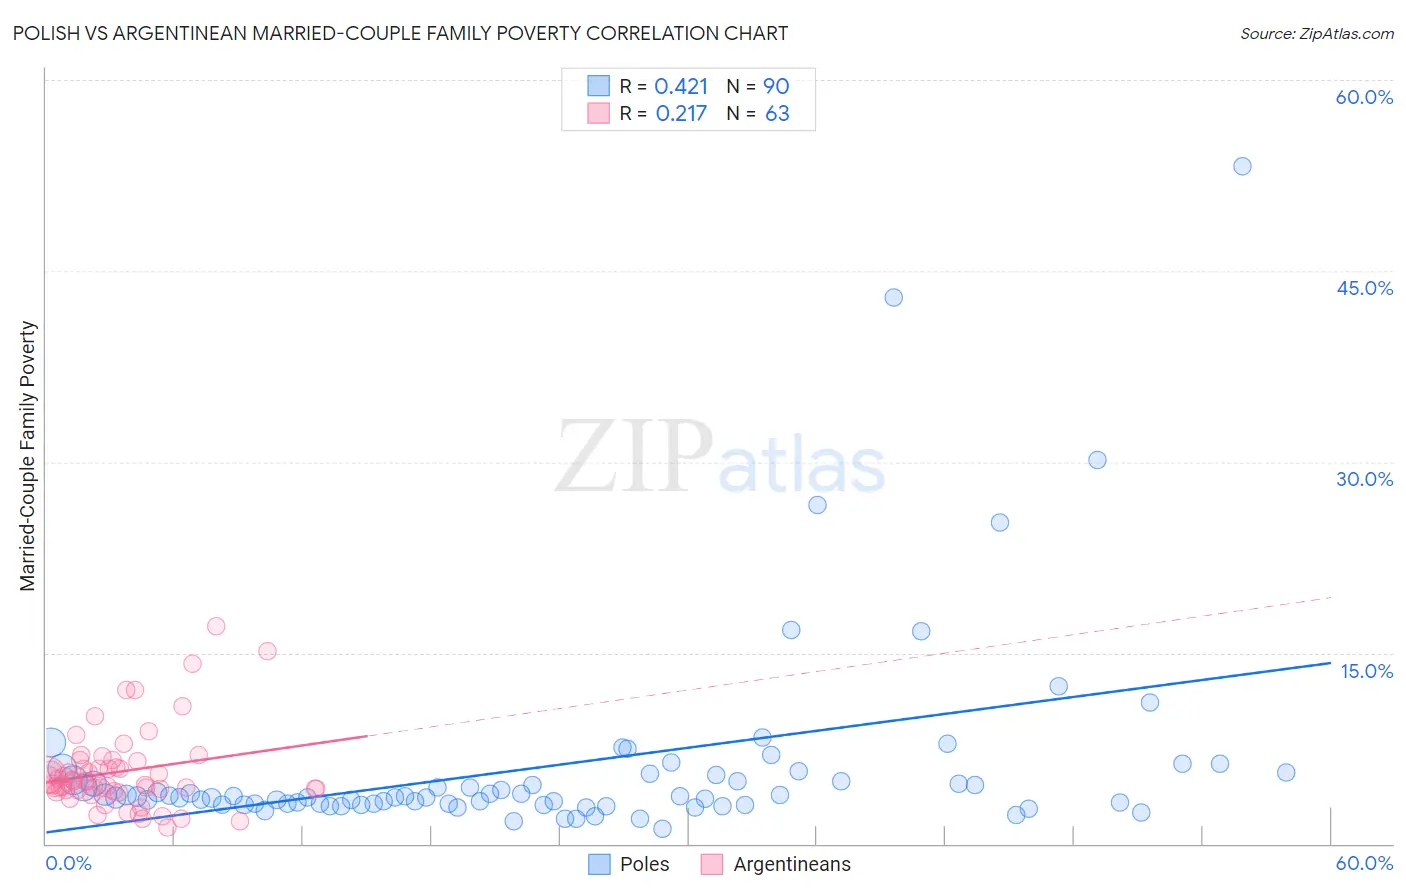 Polish vs Argentinean Married-Couple Family Poverty